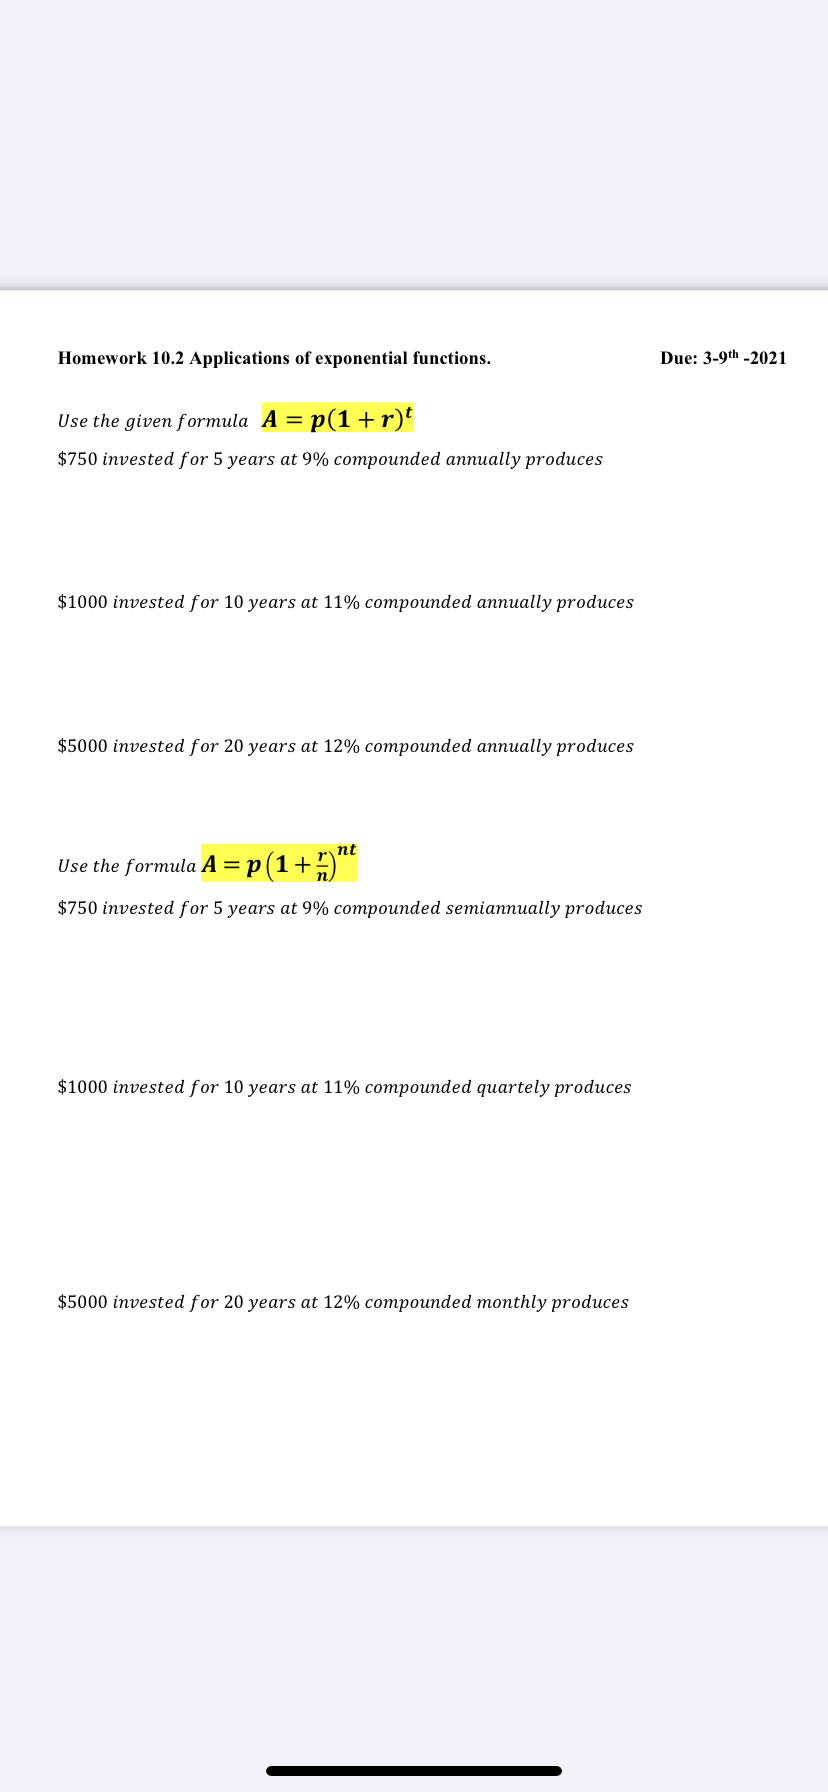 Homework 10.2 Applications of exponential functions.
Due: 3-9th -2021
Use the given formula A = p(1+r)'
%3D
$750 invested for 5 years at 9% compounded annually produces
$1000 invested for 10 years at 11% compounded annually produces
$5000 invested for 20 years at 12% compounded annually produces
nt
Use the formula A
| = p (1+)*
$750 invested for 5 years at 9% compounded semiannually produces
$1000 invested for 10 years at 11% compounded quartely produces
$5000 invested for 20 years at 12% compounded monthly produces
